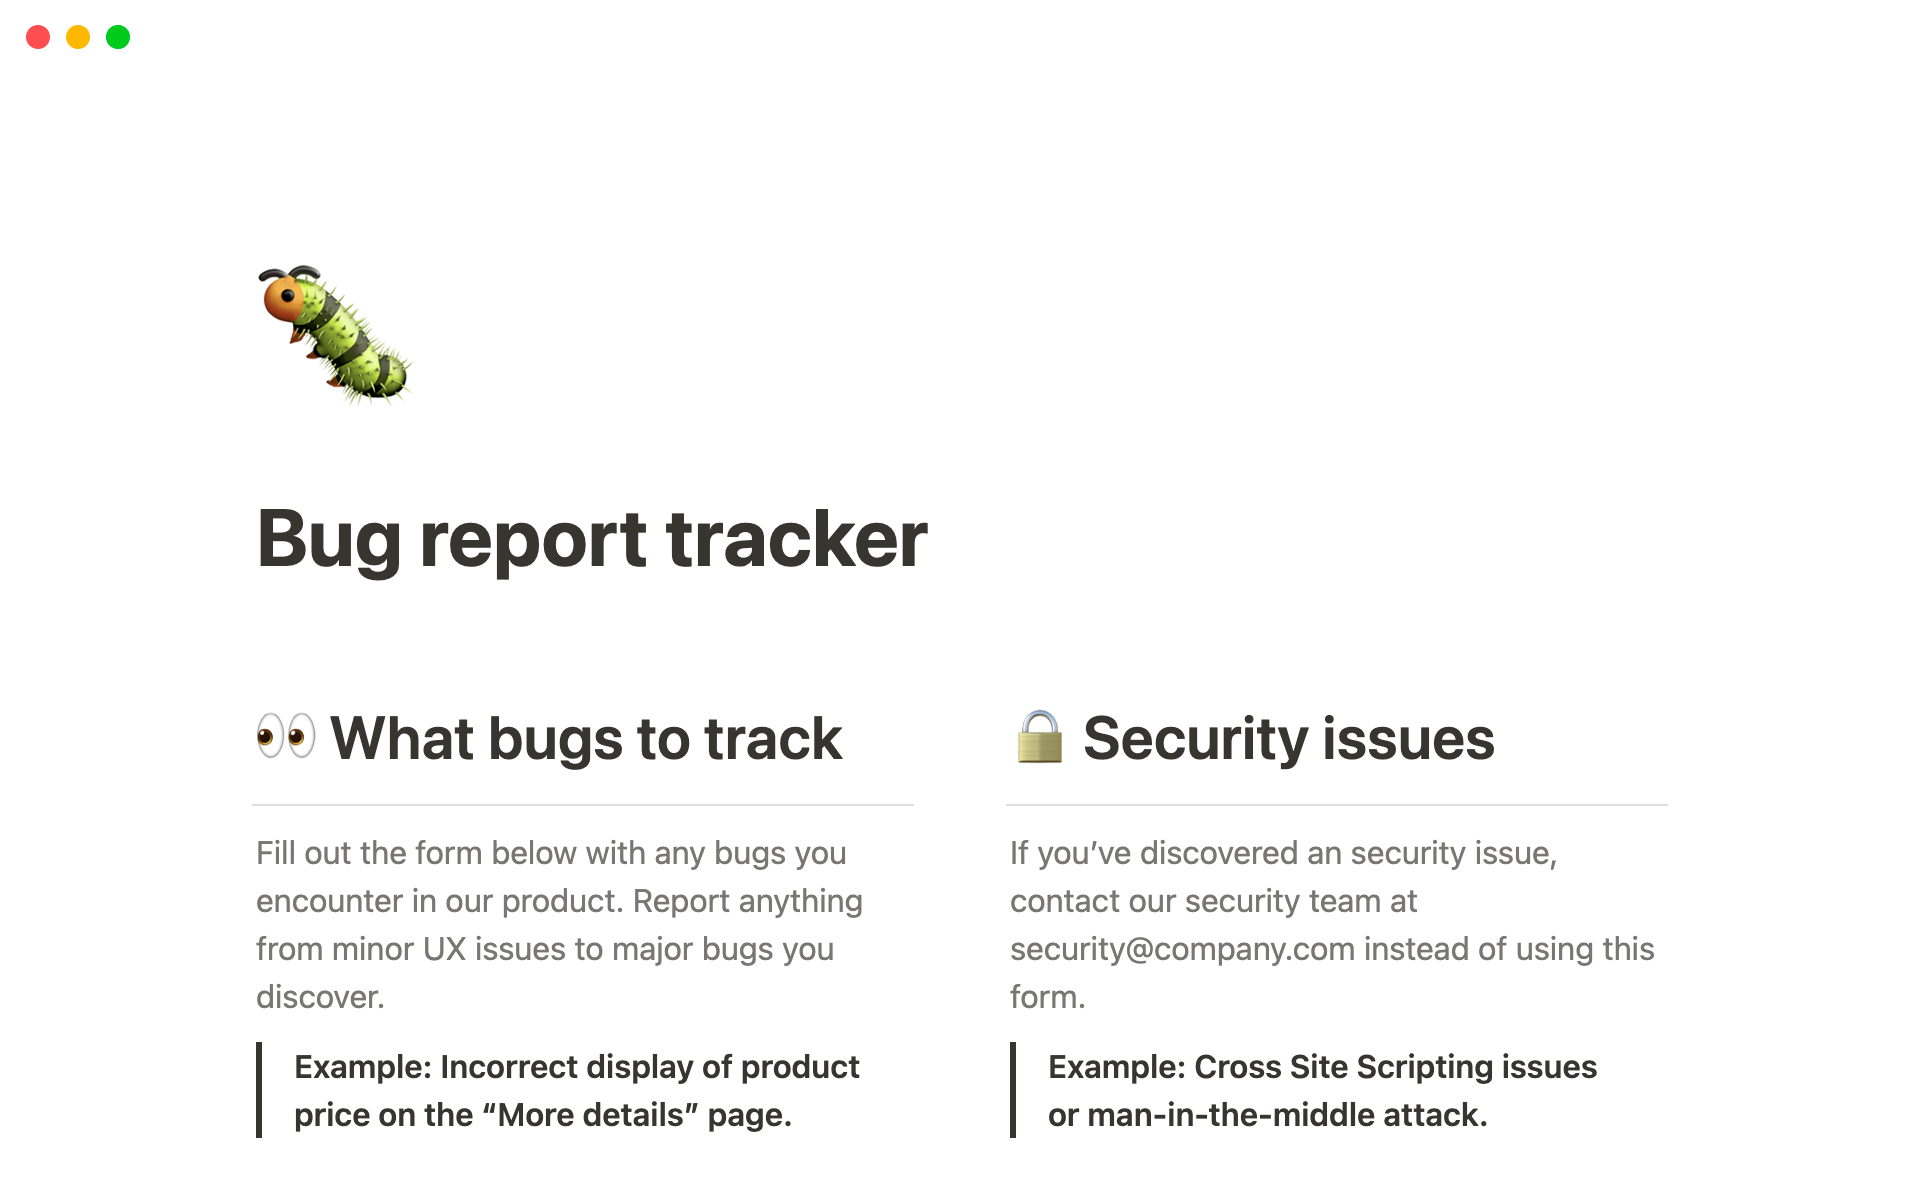 This bug report tracking template provides a structured form for users to report and track bugs in any product.